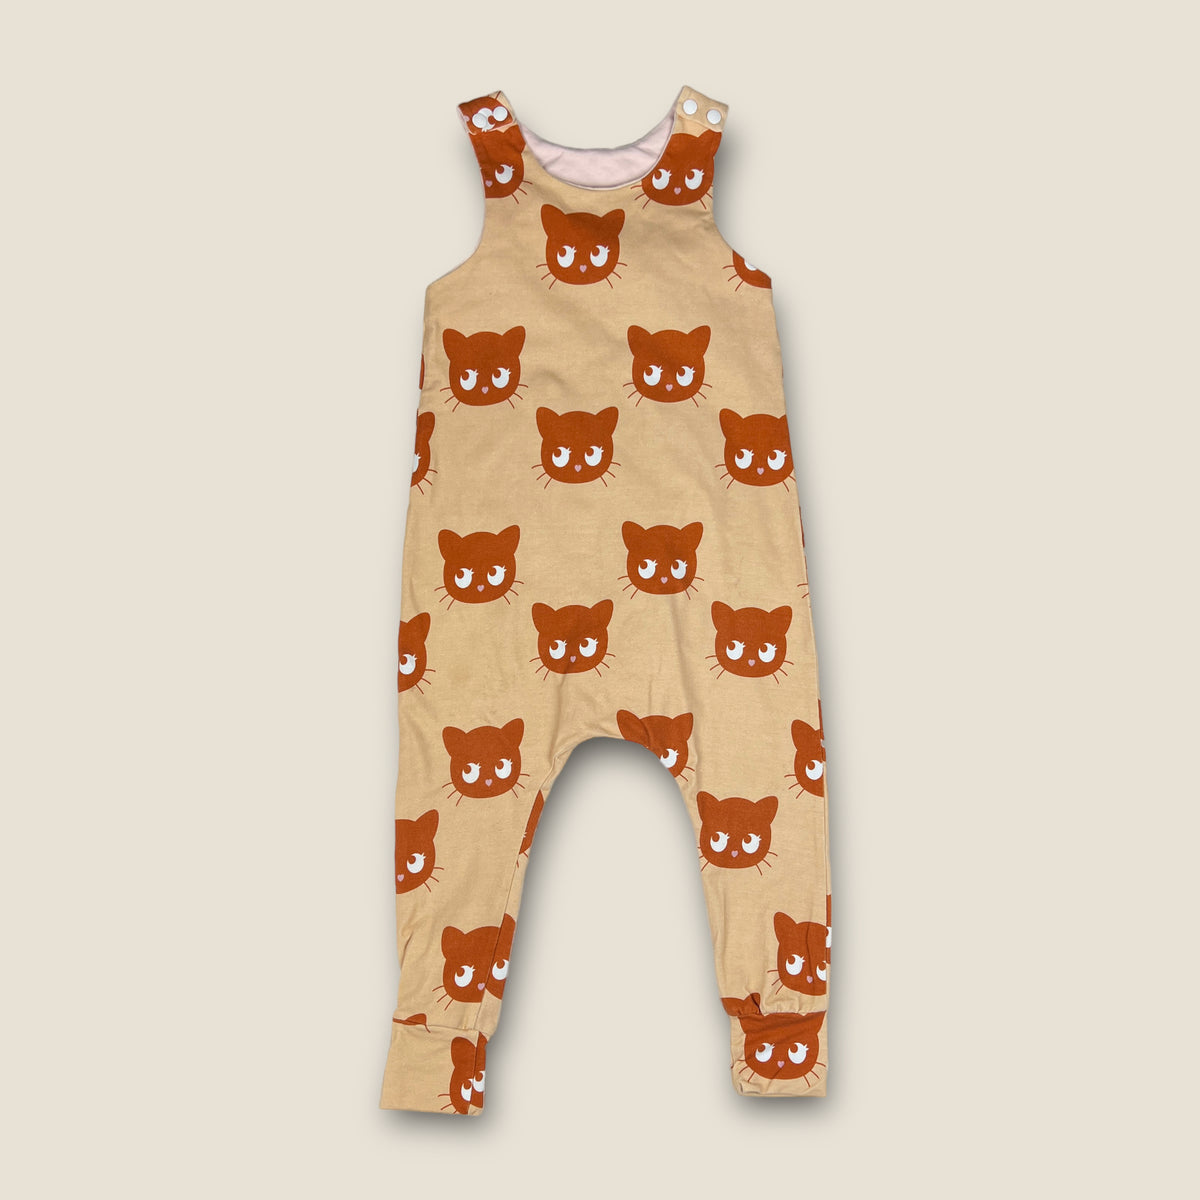 Marmalade Sky Romper size 3-4 years